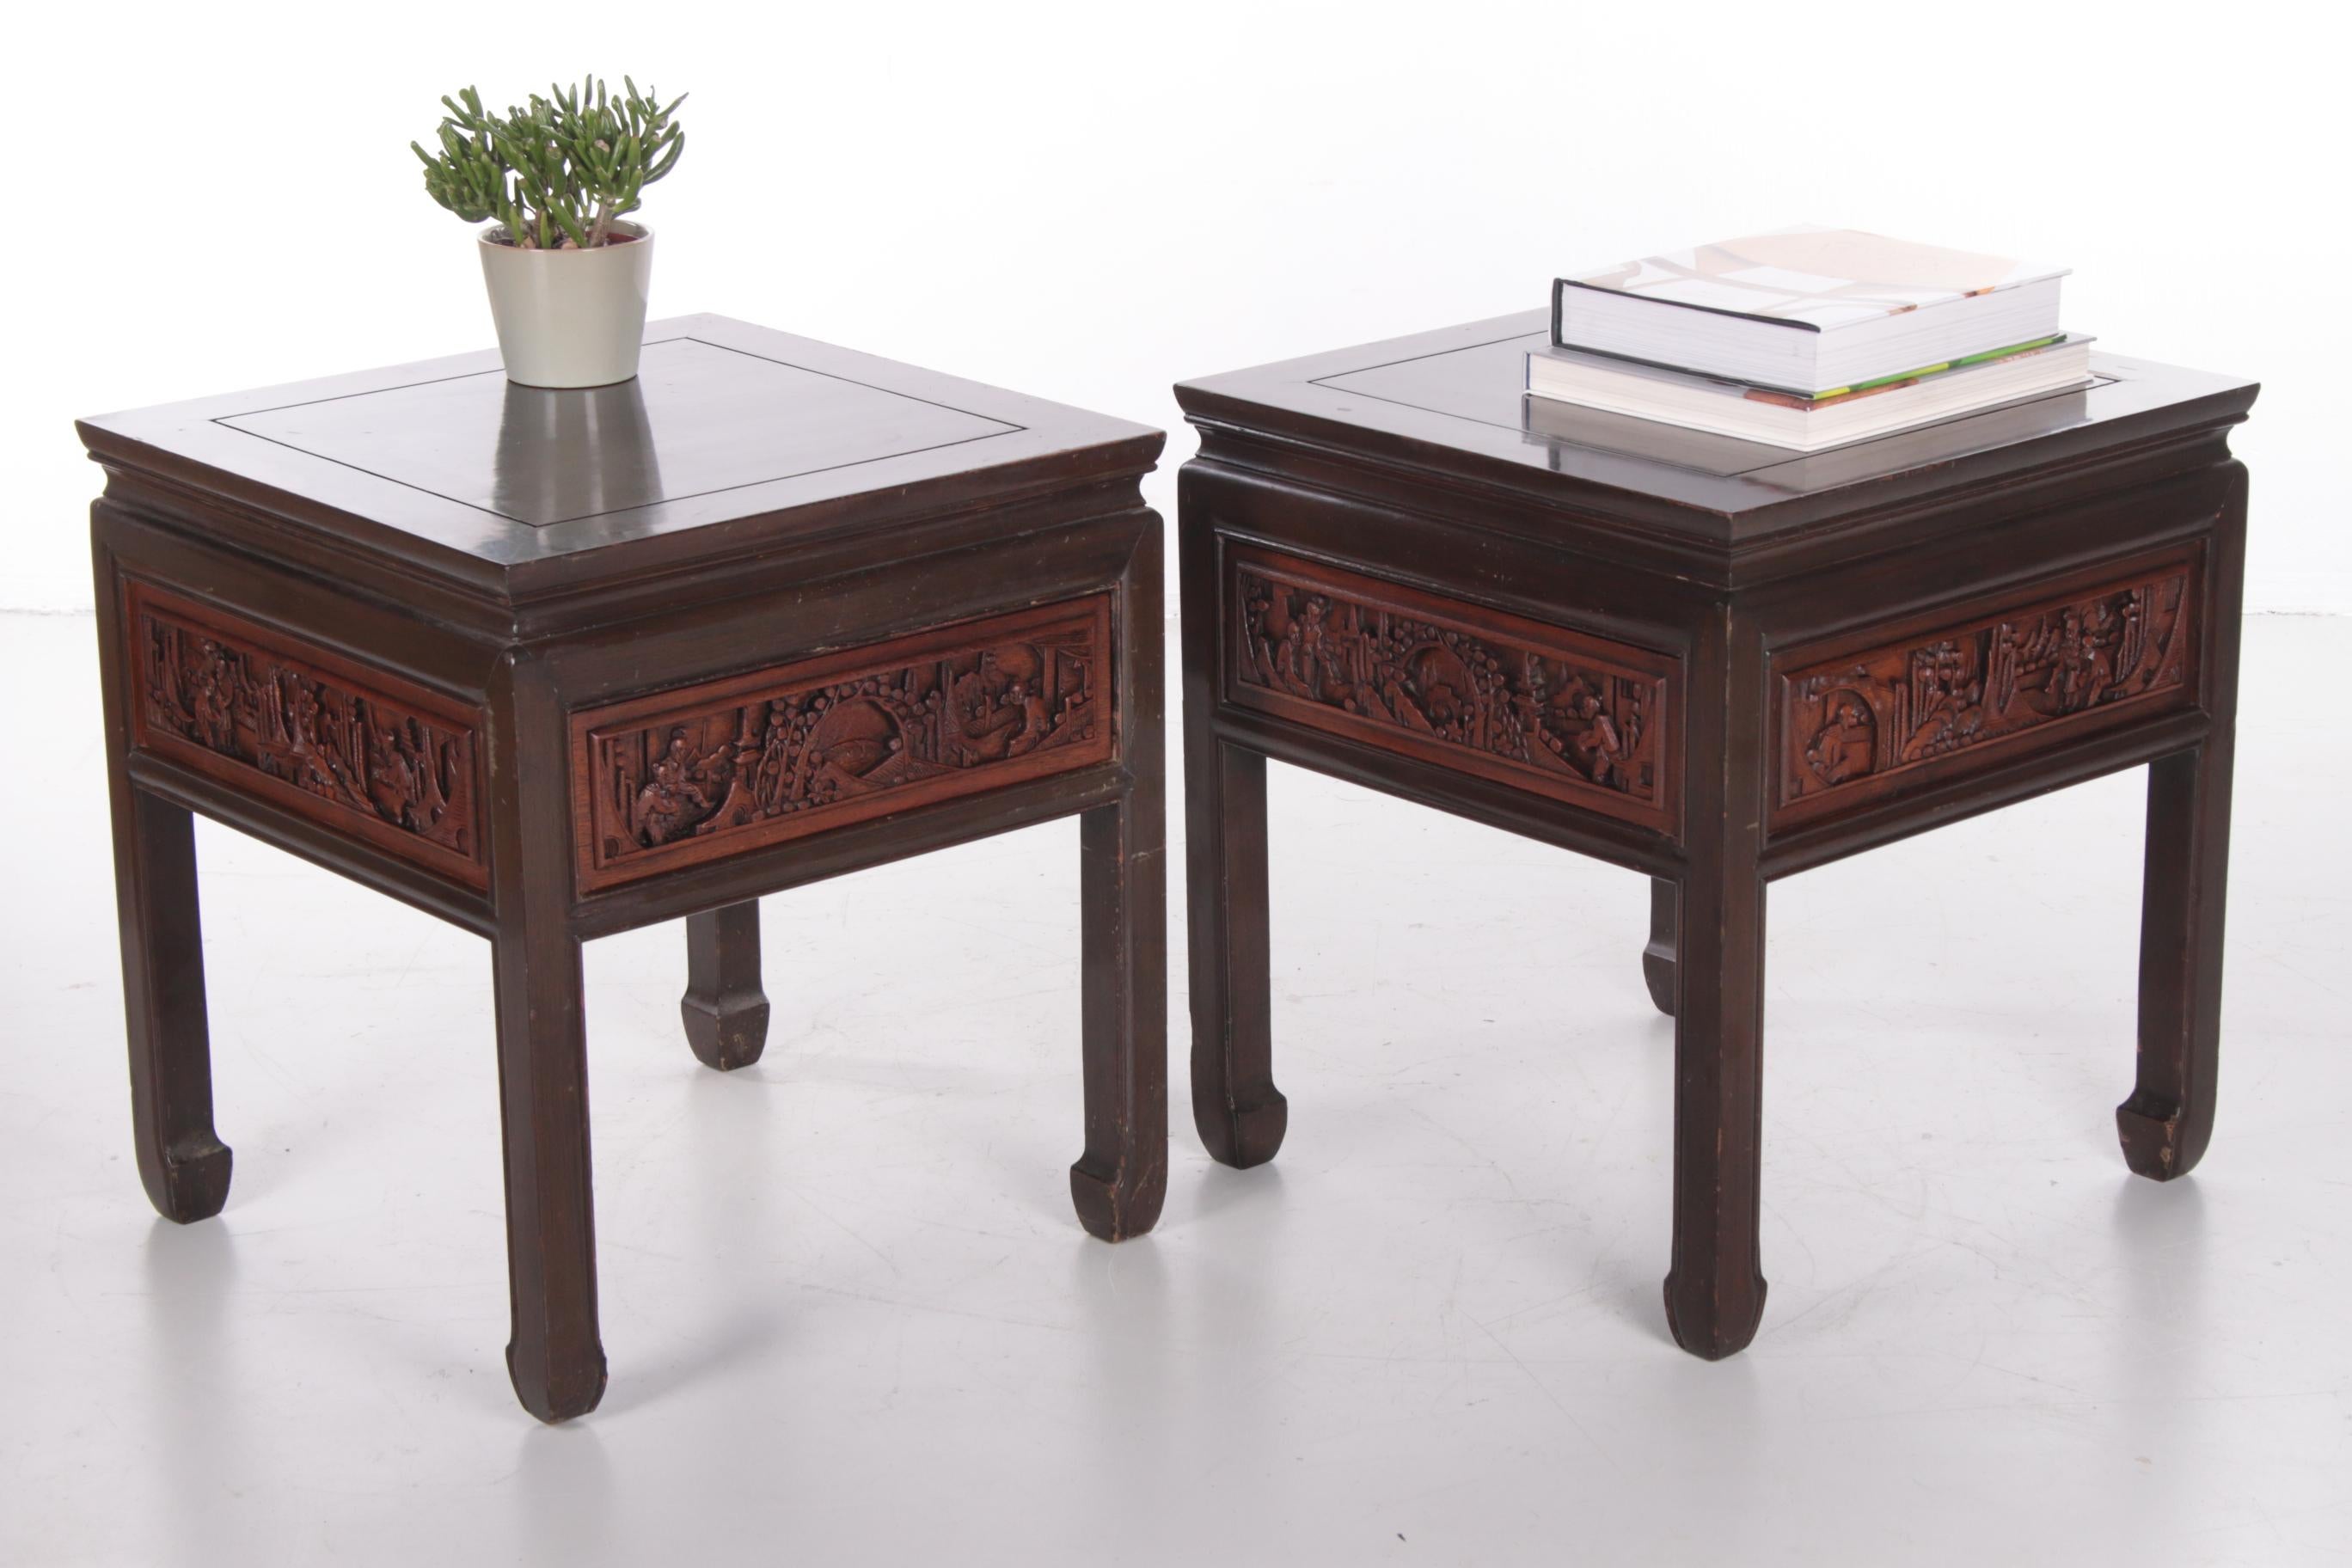 A Set of 20th century Chinese Rodewood bedside tables with beautiful engraving

These cabinets are made of heavy Rosewoon Palisander wood and the cabinets have a hidden drawer with handle.

These cabinets have beautiful hand carvings.